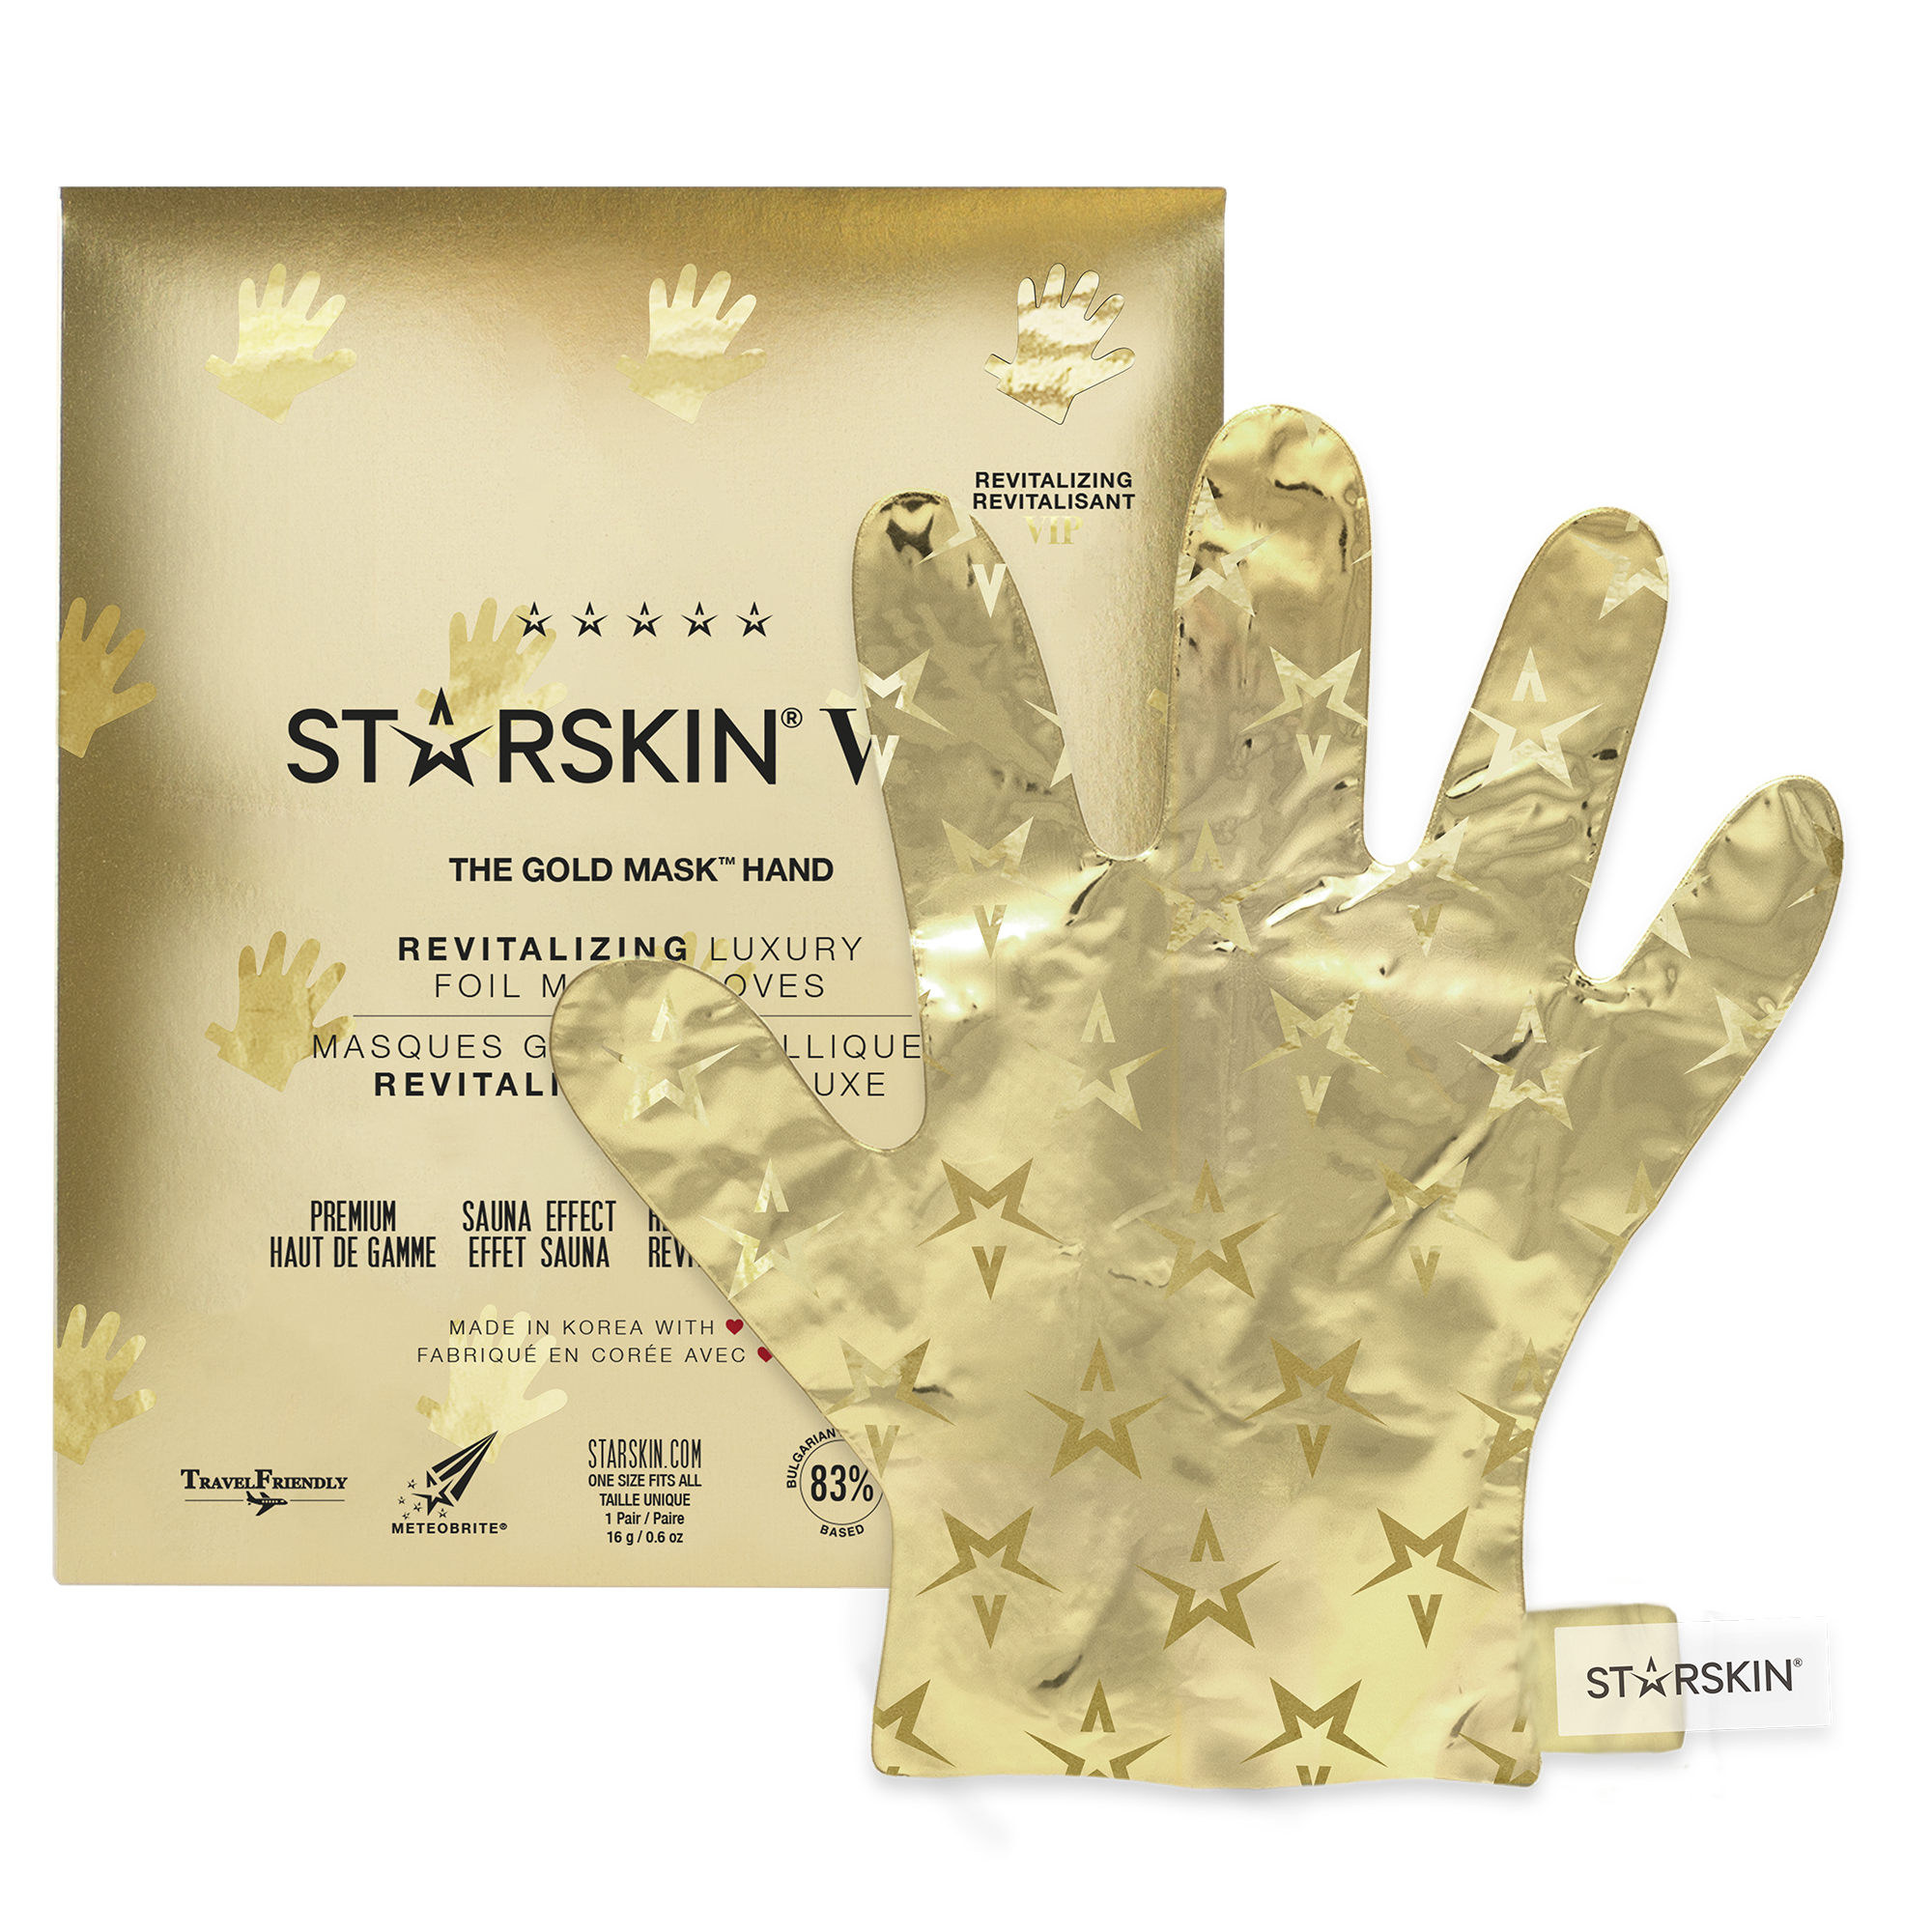 The VIP Gold Mask Hand from Starskin being shoecased